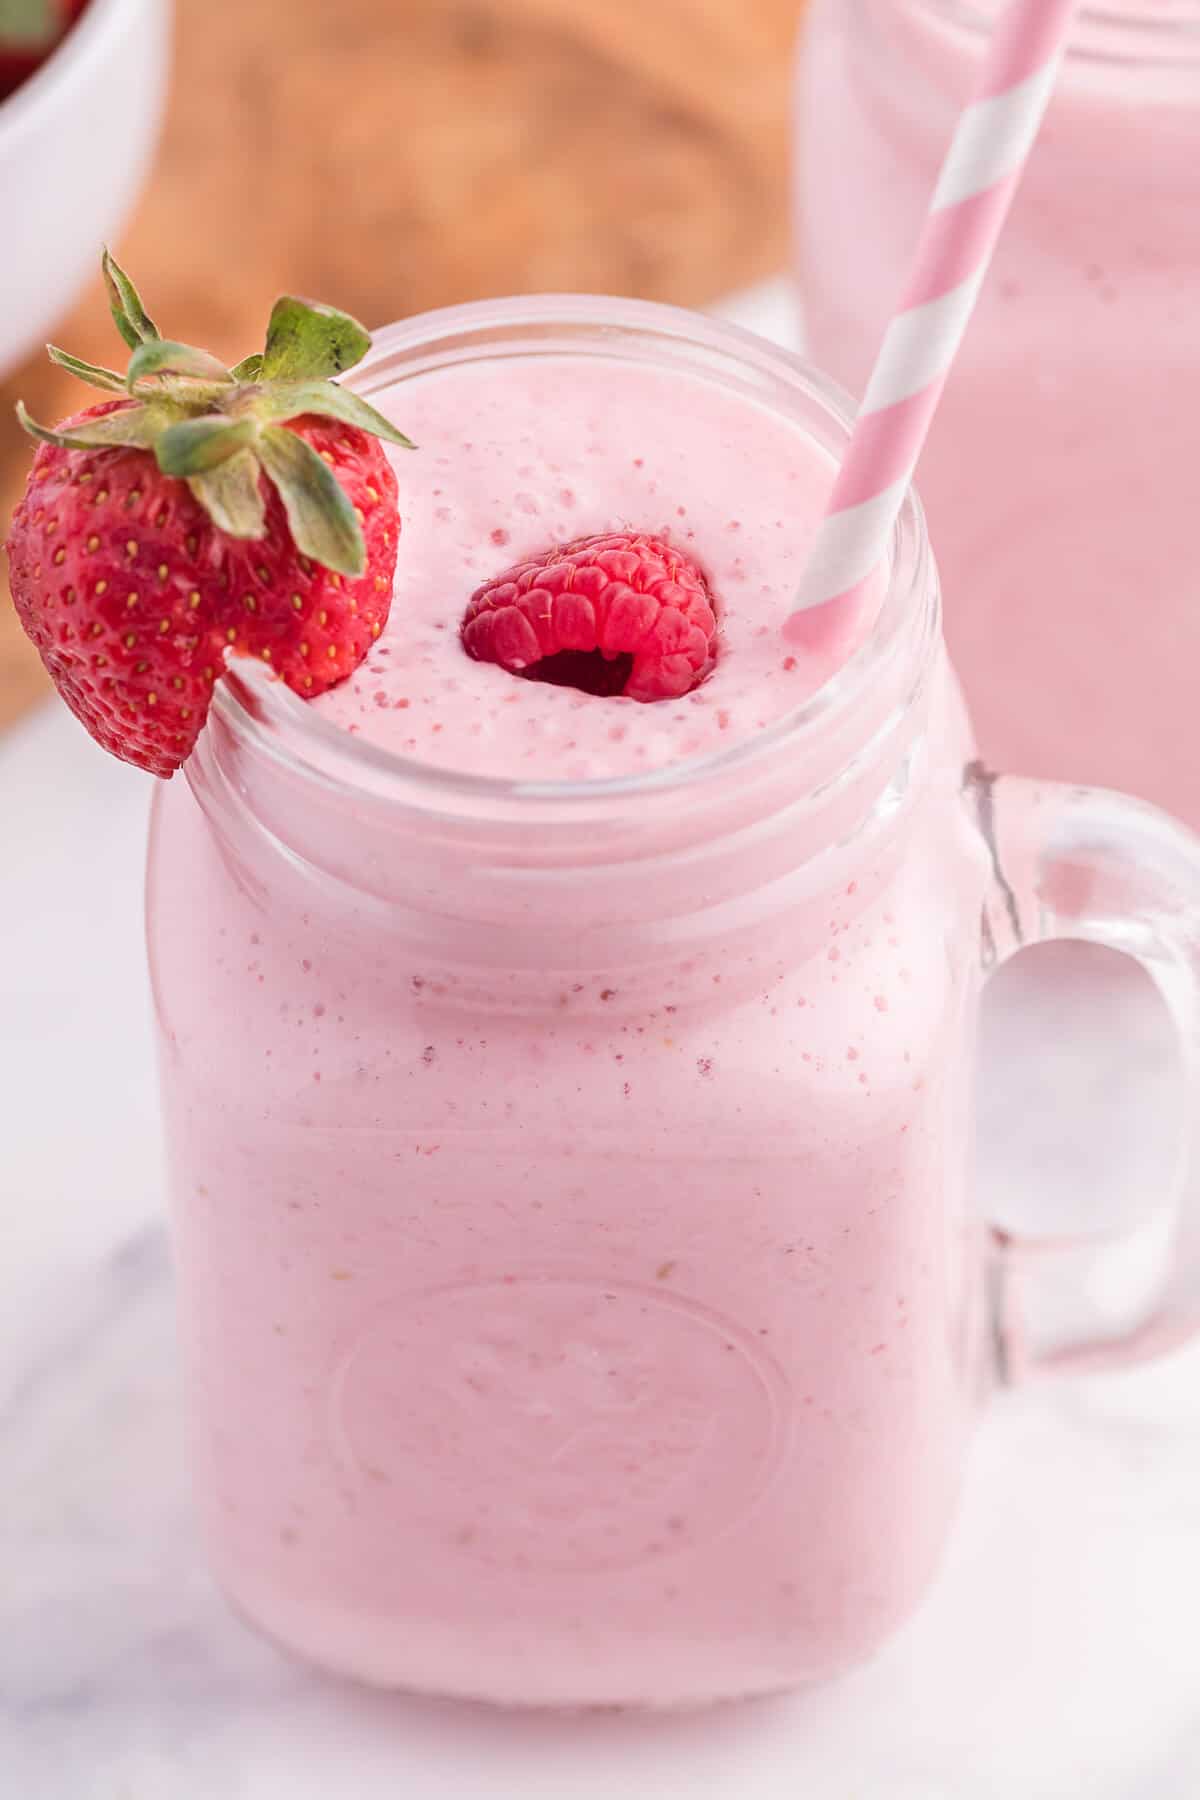 Berry Jam Smoothie - Made with simple ingredients you're likely to have on hand like yogurt, milk and jam, you can make this quick "berry"-licious smoothie in no time at all!